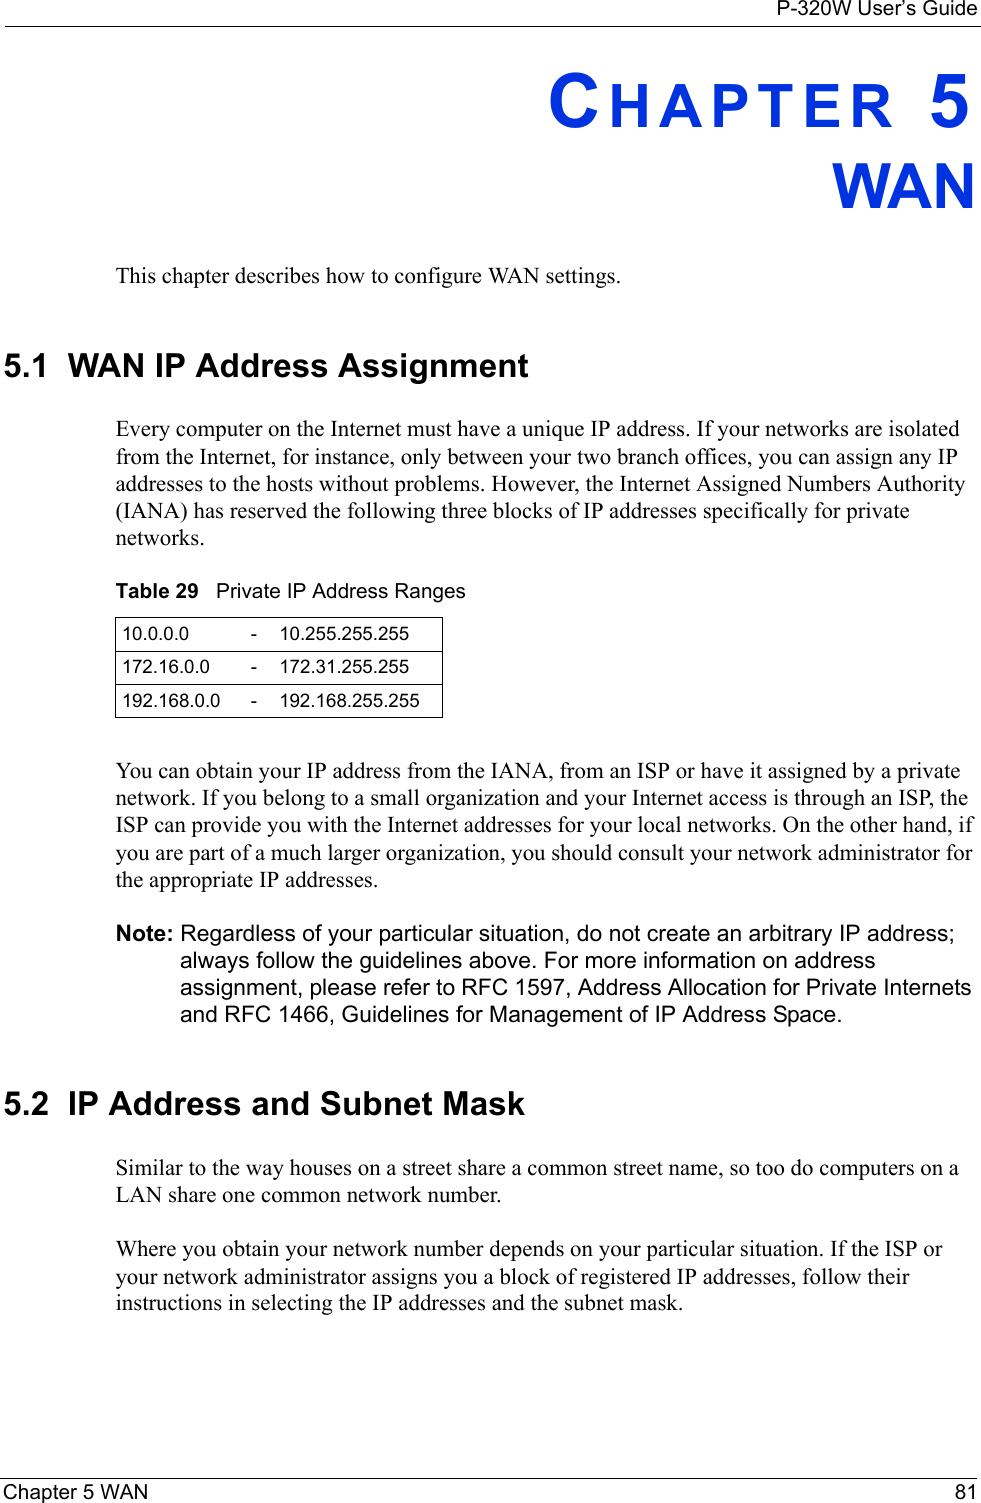 P-320W User’s GuideChapter 5 WAN 81CHAPTER 5WANThis chapter describes how to configure WAN settings.5.1  WAN IP Address AssignmentEvery computer on the Internet must have a unique IP address. If your networks are isolated from the Internet, for instance, only between your two branch offices, you can assign any IP addresses to the hosts without problems. However, the Internet Assigned Numbers Authority (IANA) has reserved the following three blocks of IP addresses specifically for private networks.Table 29   Private IP Address Ranges10.0.0.0 -10.255.255.255172.16.0.0 -172.31.255.255192.168.0.0 -192.168.255.255You can obtain your IP address from the IANA, from an ISP or have it assigned by a private network. If you belong to a small organization and your Internet access is through an ISP, the ISP can provide you with the Internet addresses for your local networks. On the other hand, if you are part of a much larger organization, you should consult your network administrator for the appropriate IP addresses.Note: Regardless of your particular situation, do not create an arbitrary IP address; always follow the guidelines above. For more information on address assignment, please refer to RFC 1597, Address Allocation for Private Internets and RFC 1466, Guidelines for Management of IP Address Space.5.2  IP Address and Subnet MaskSimilar to the way houses on a street share a common street name, so too do computers on a LAN share one common network number.Where you obtain your network number depends on your particular situation. If the ISP or your network administrator assigns you a block of registered IP addresses, follow their instructions in selecting the IP addresses and the subnet mask.